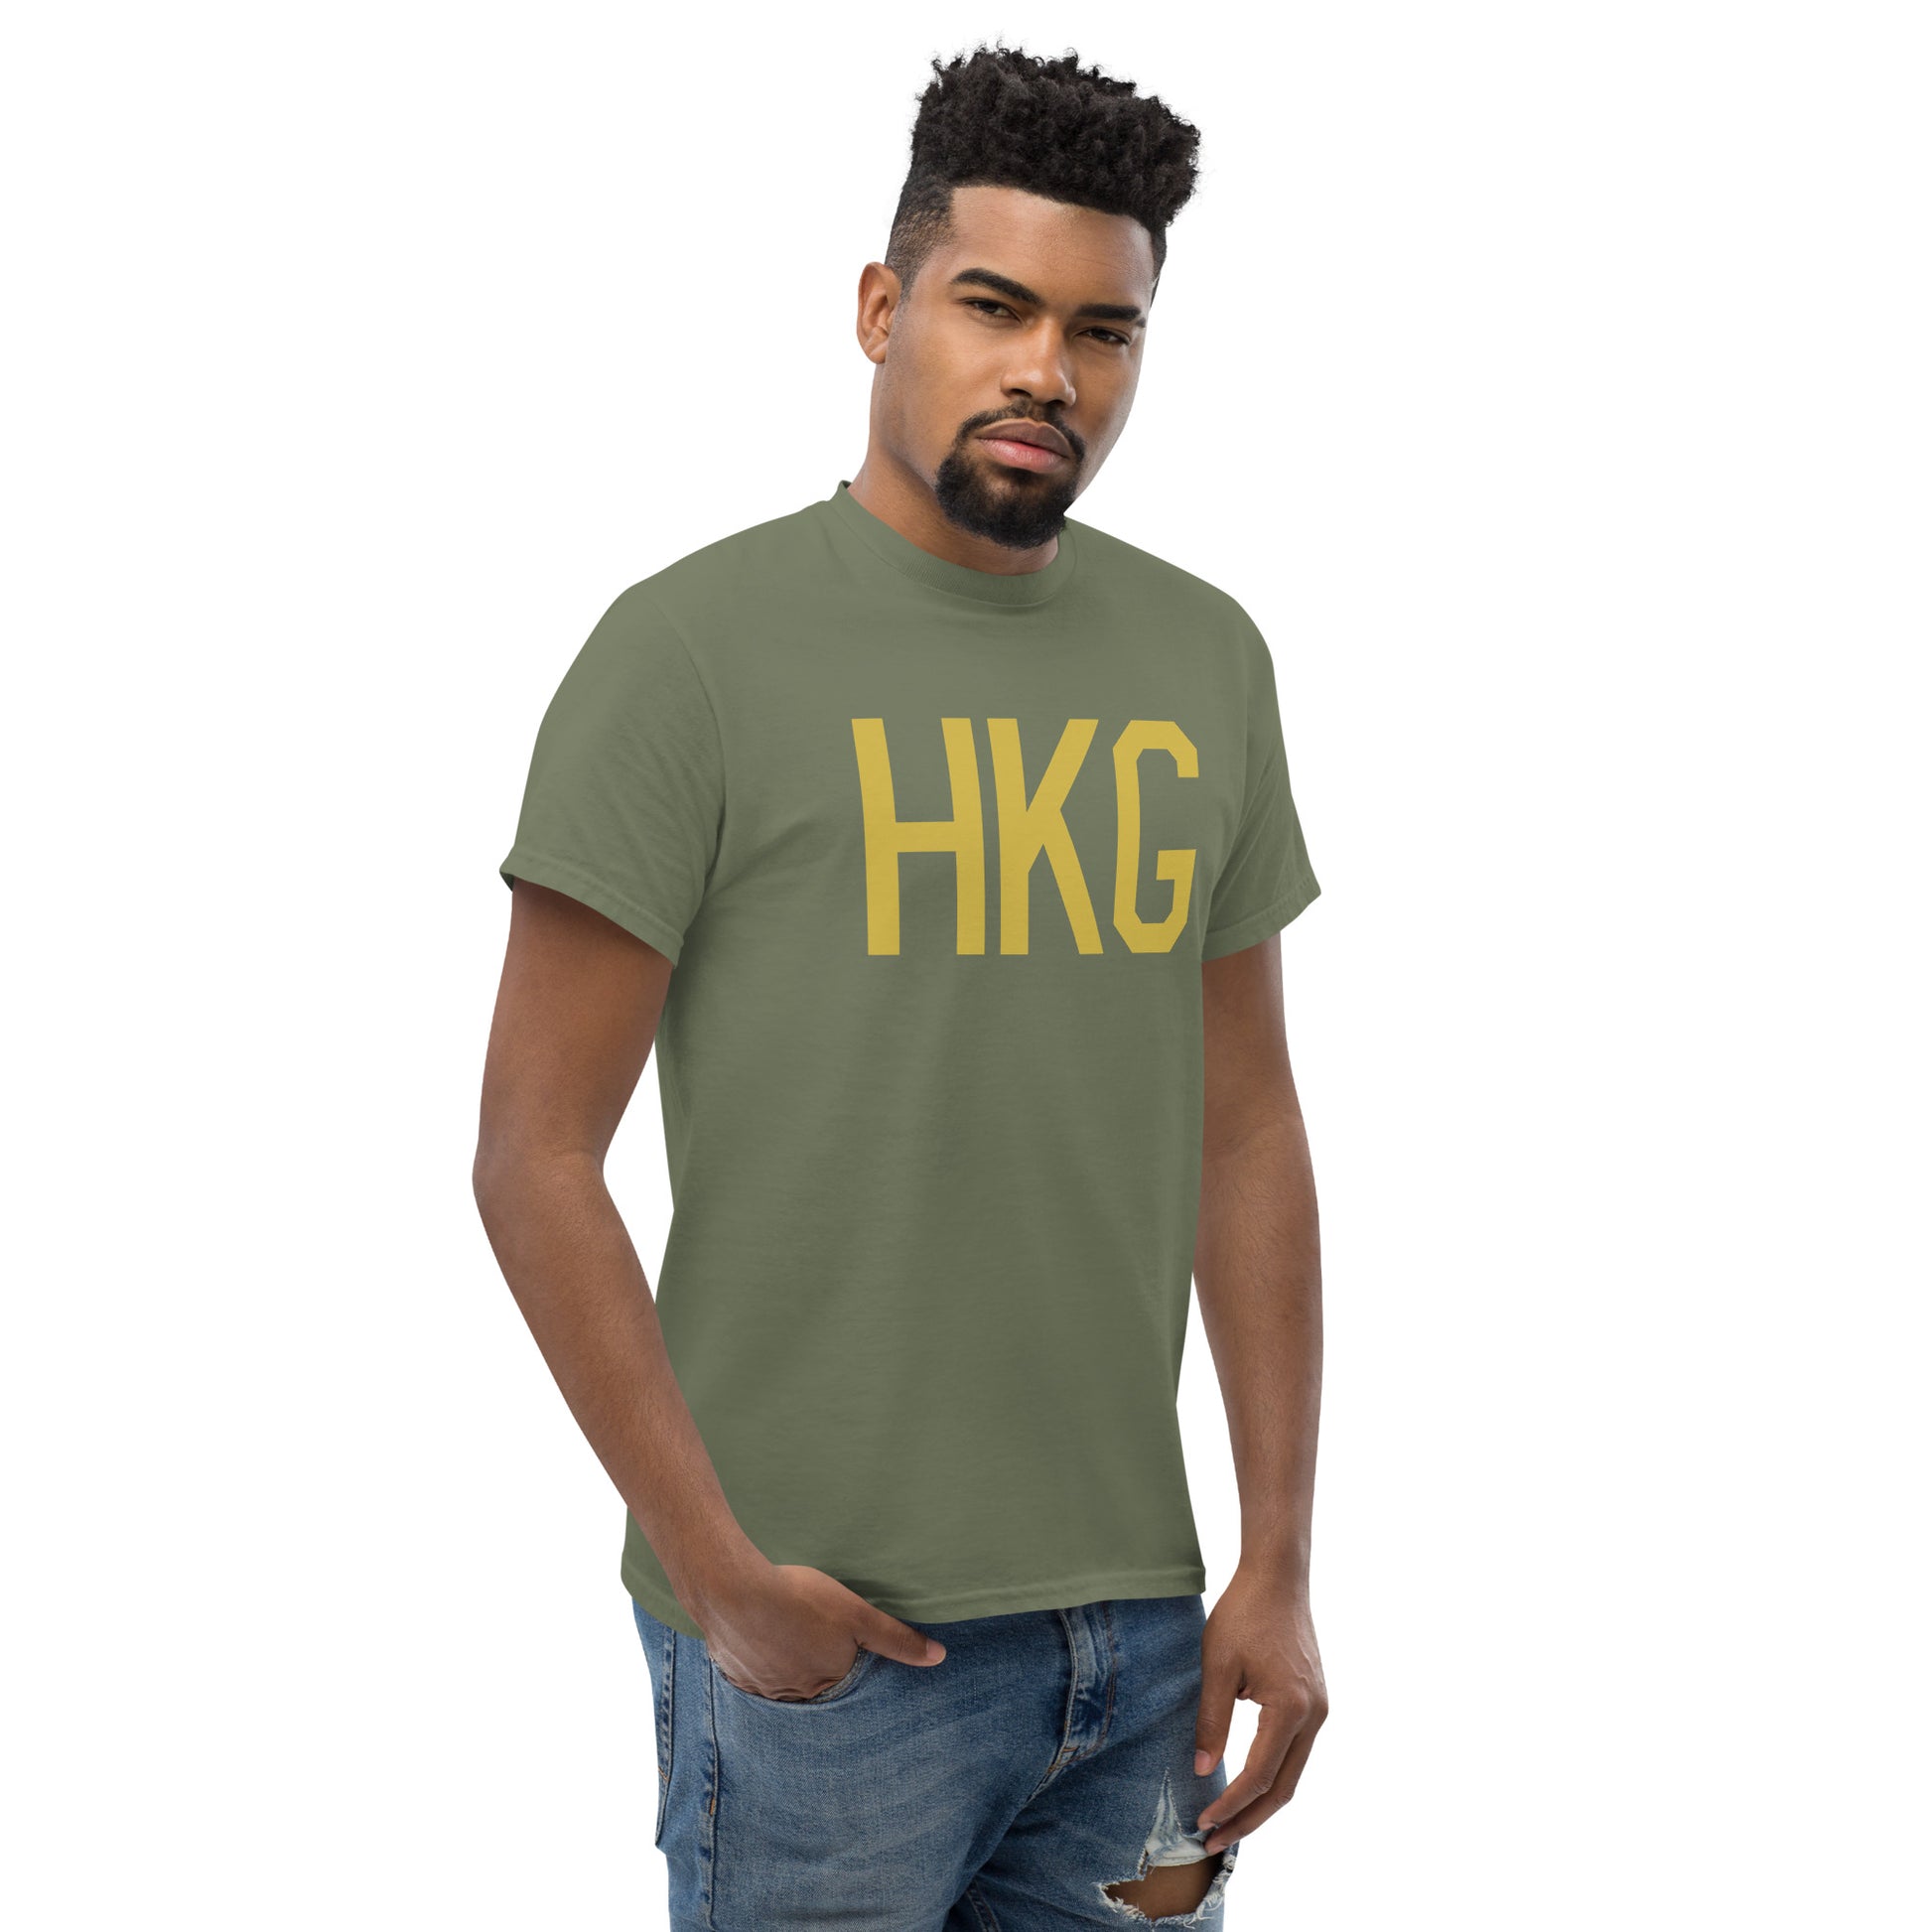 Aviation Enthusiast Men's Tee - Old Gold Graphic • HKG Hong Kong • YHM Designs - Image 08